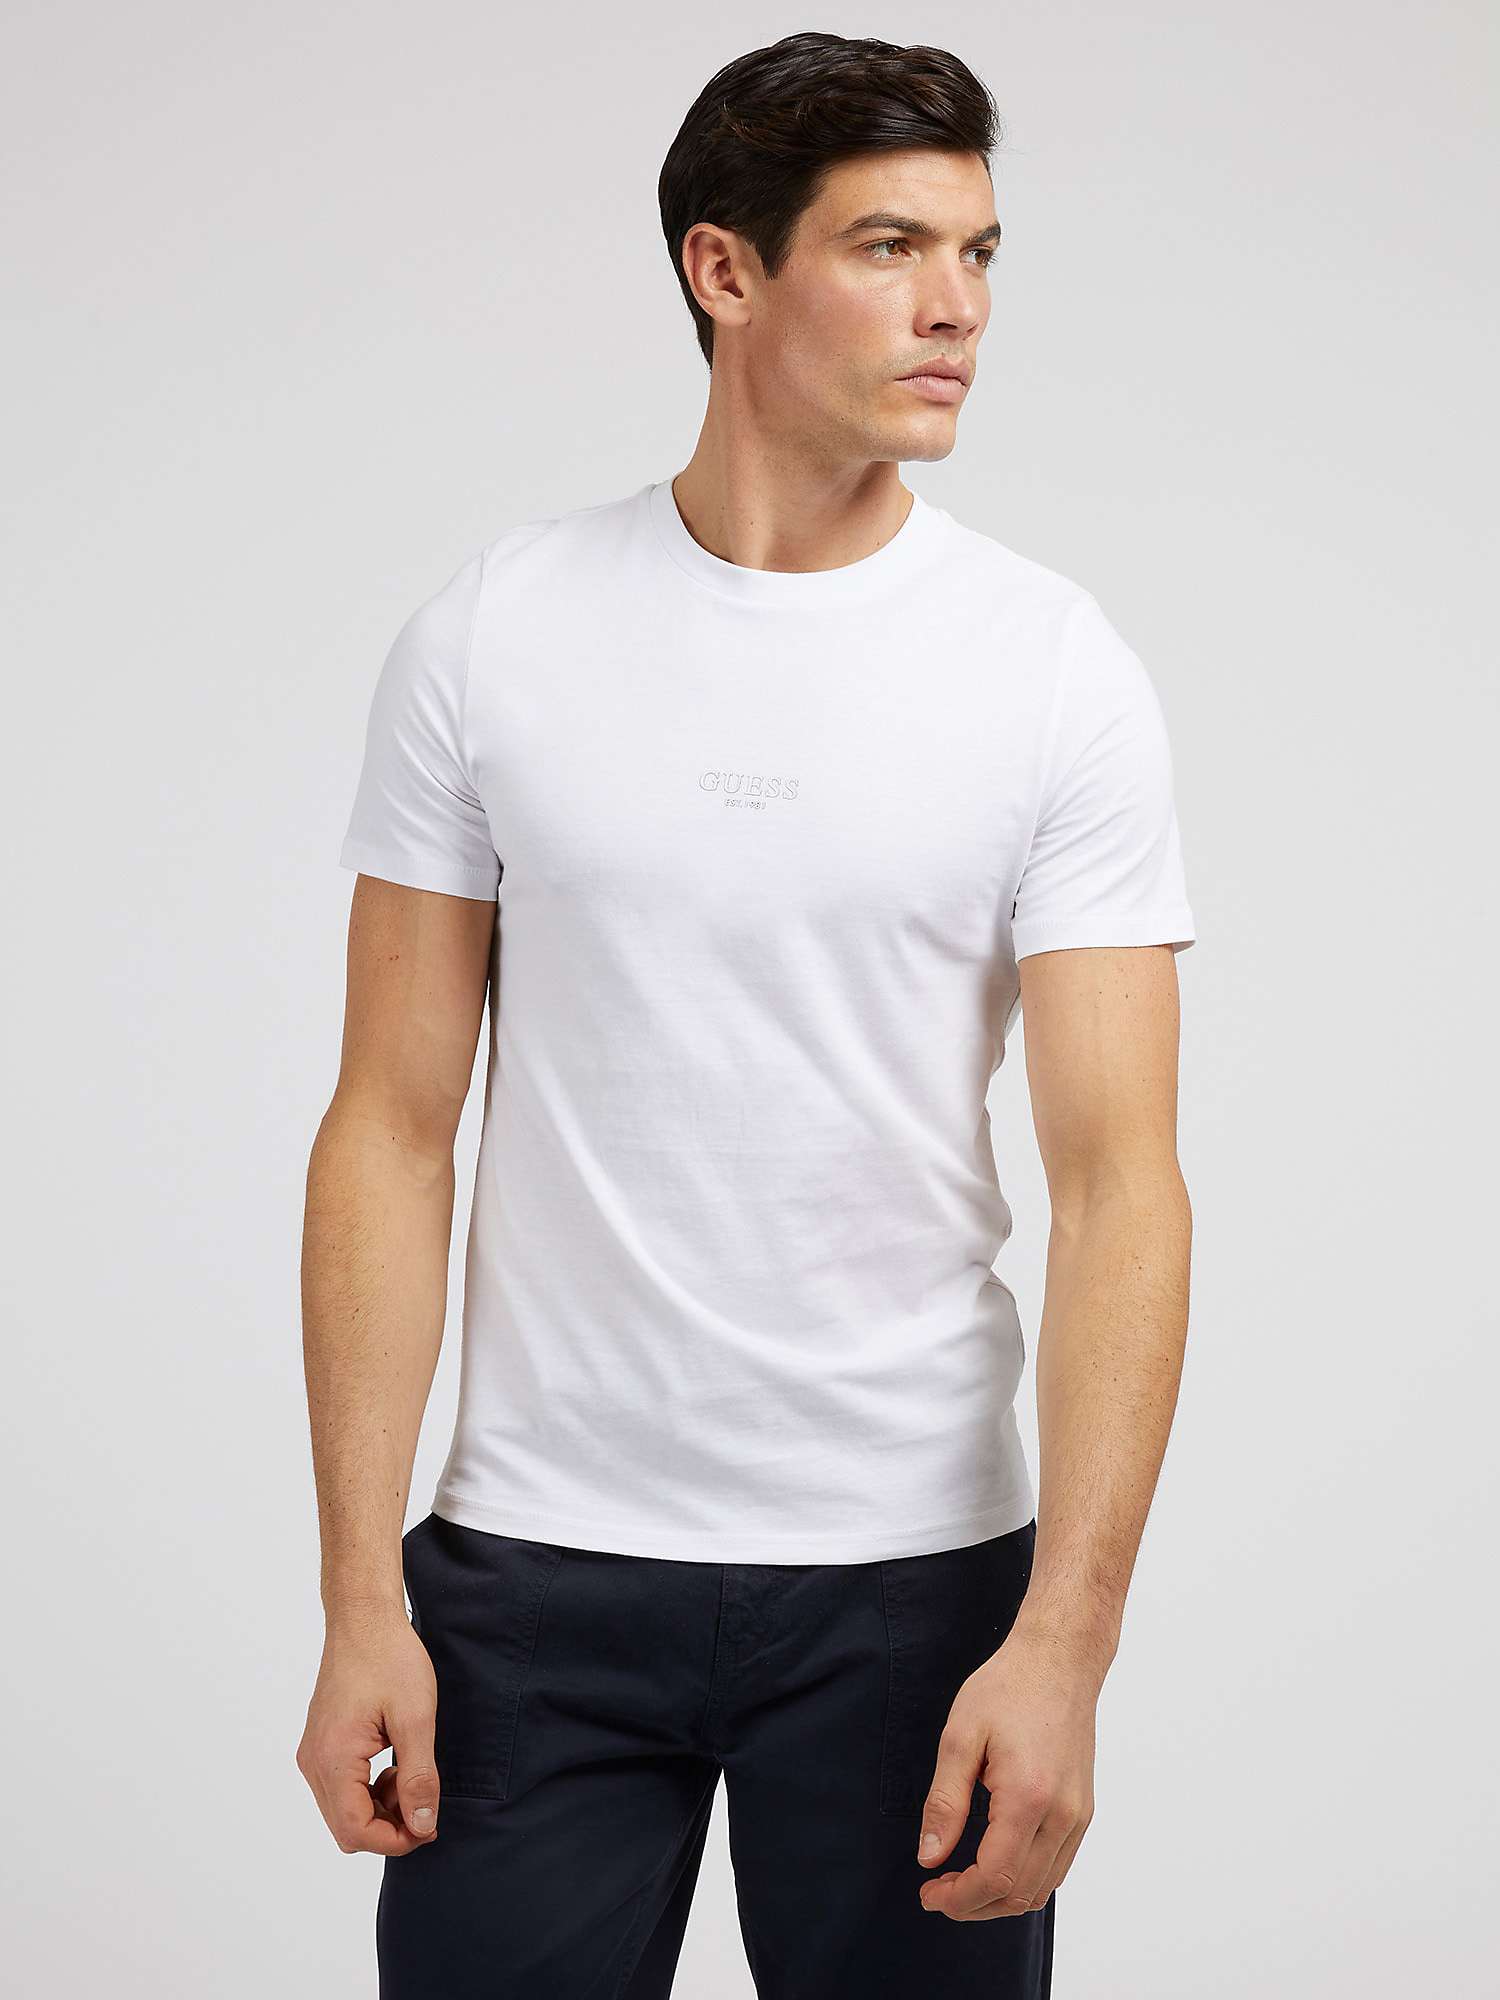 GUESS Short Sleeve T-Shirt, Pure White at John Lewis & Partners